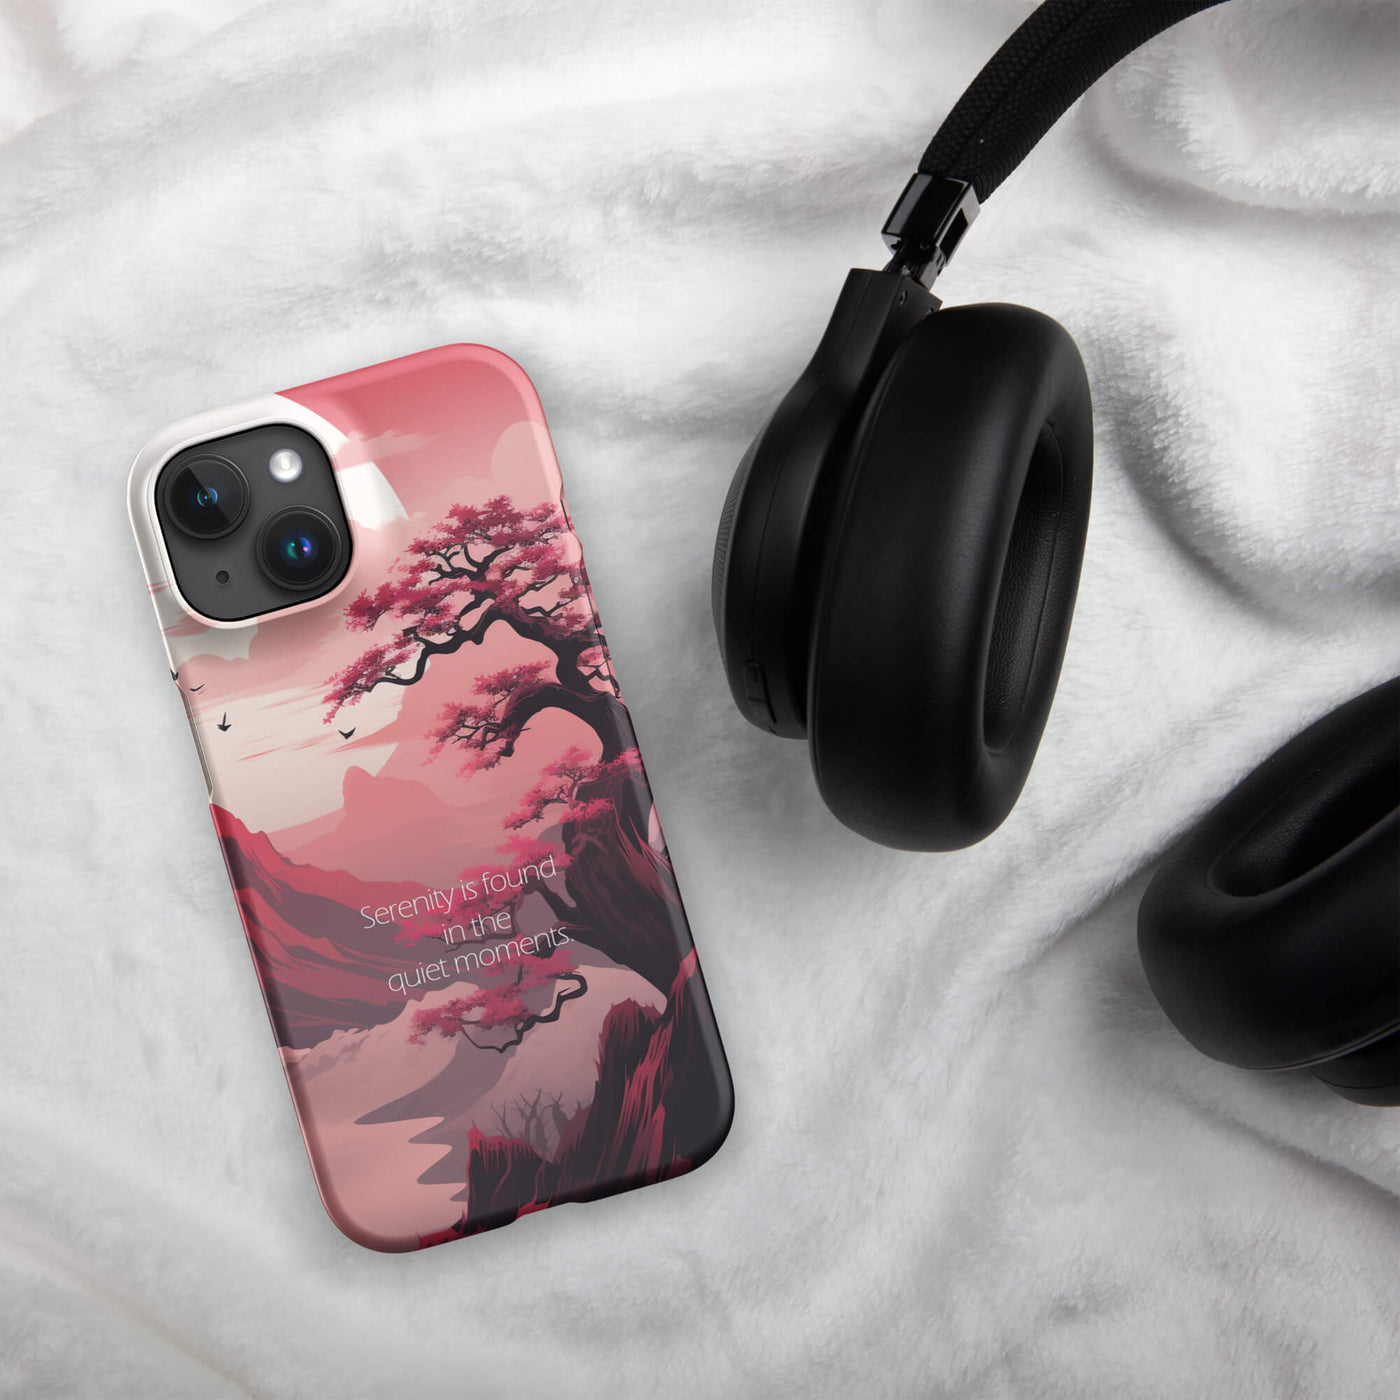 Snap Phone Case for iPhone® 15 | Serenity is found in quiet Moments